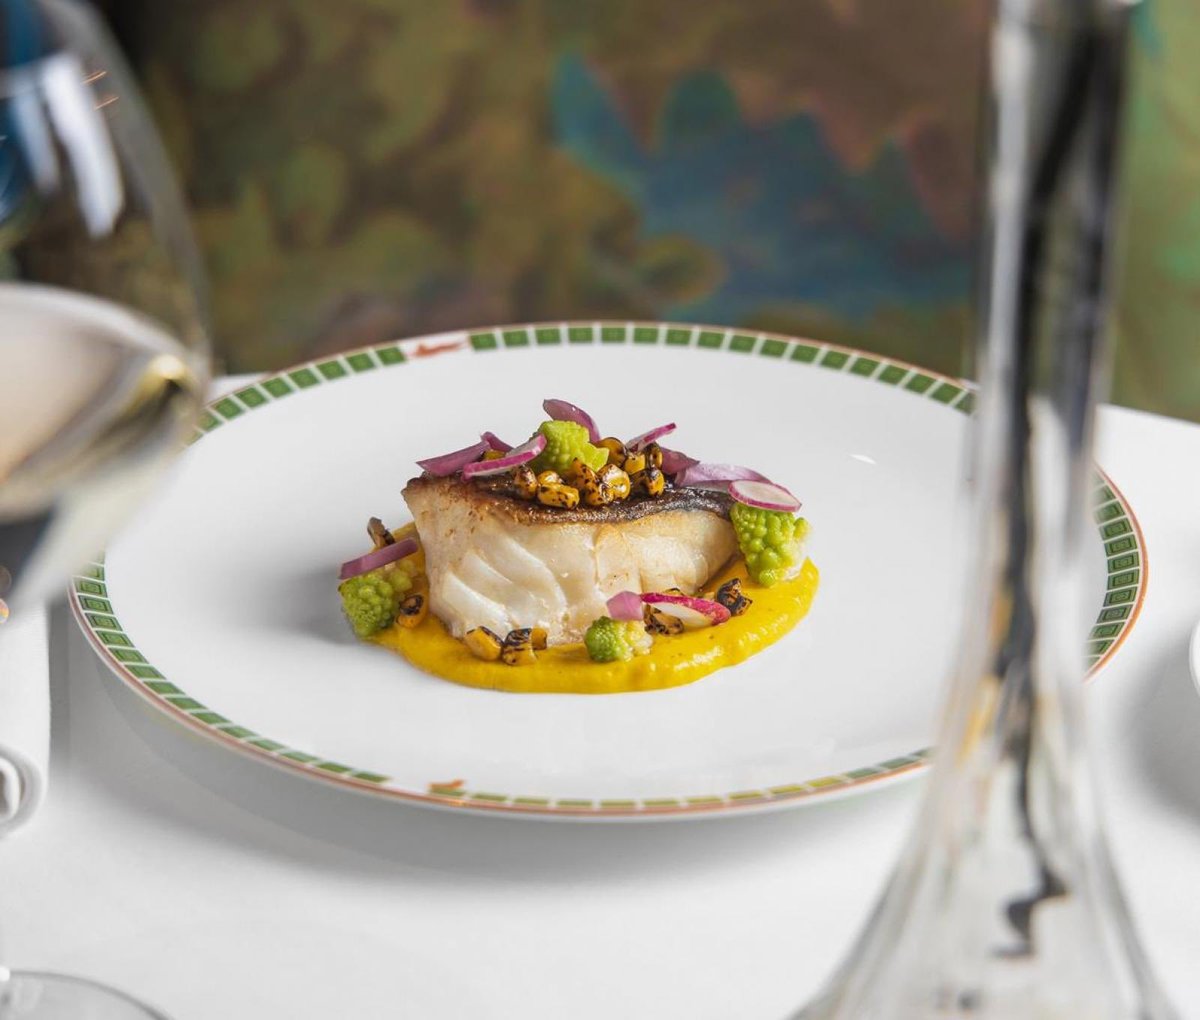 We’re excited to award 2 AA rosettes to The Glade, @sketchlondon and welcome them to our AA restaurant scheme. Our inspector loved the eclectic decor and vibrant style! Do you? Book a visit > tinyurl.com/2s6y885a #AARosettes #AALatestRated #AARated #London